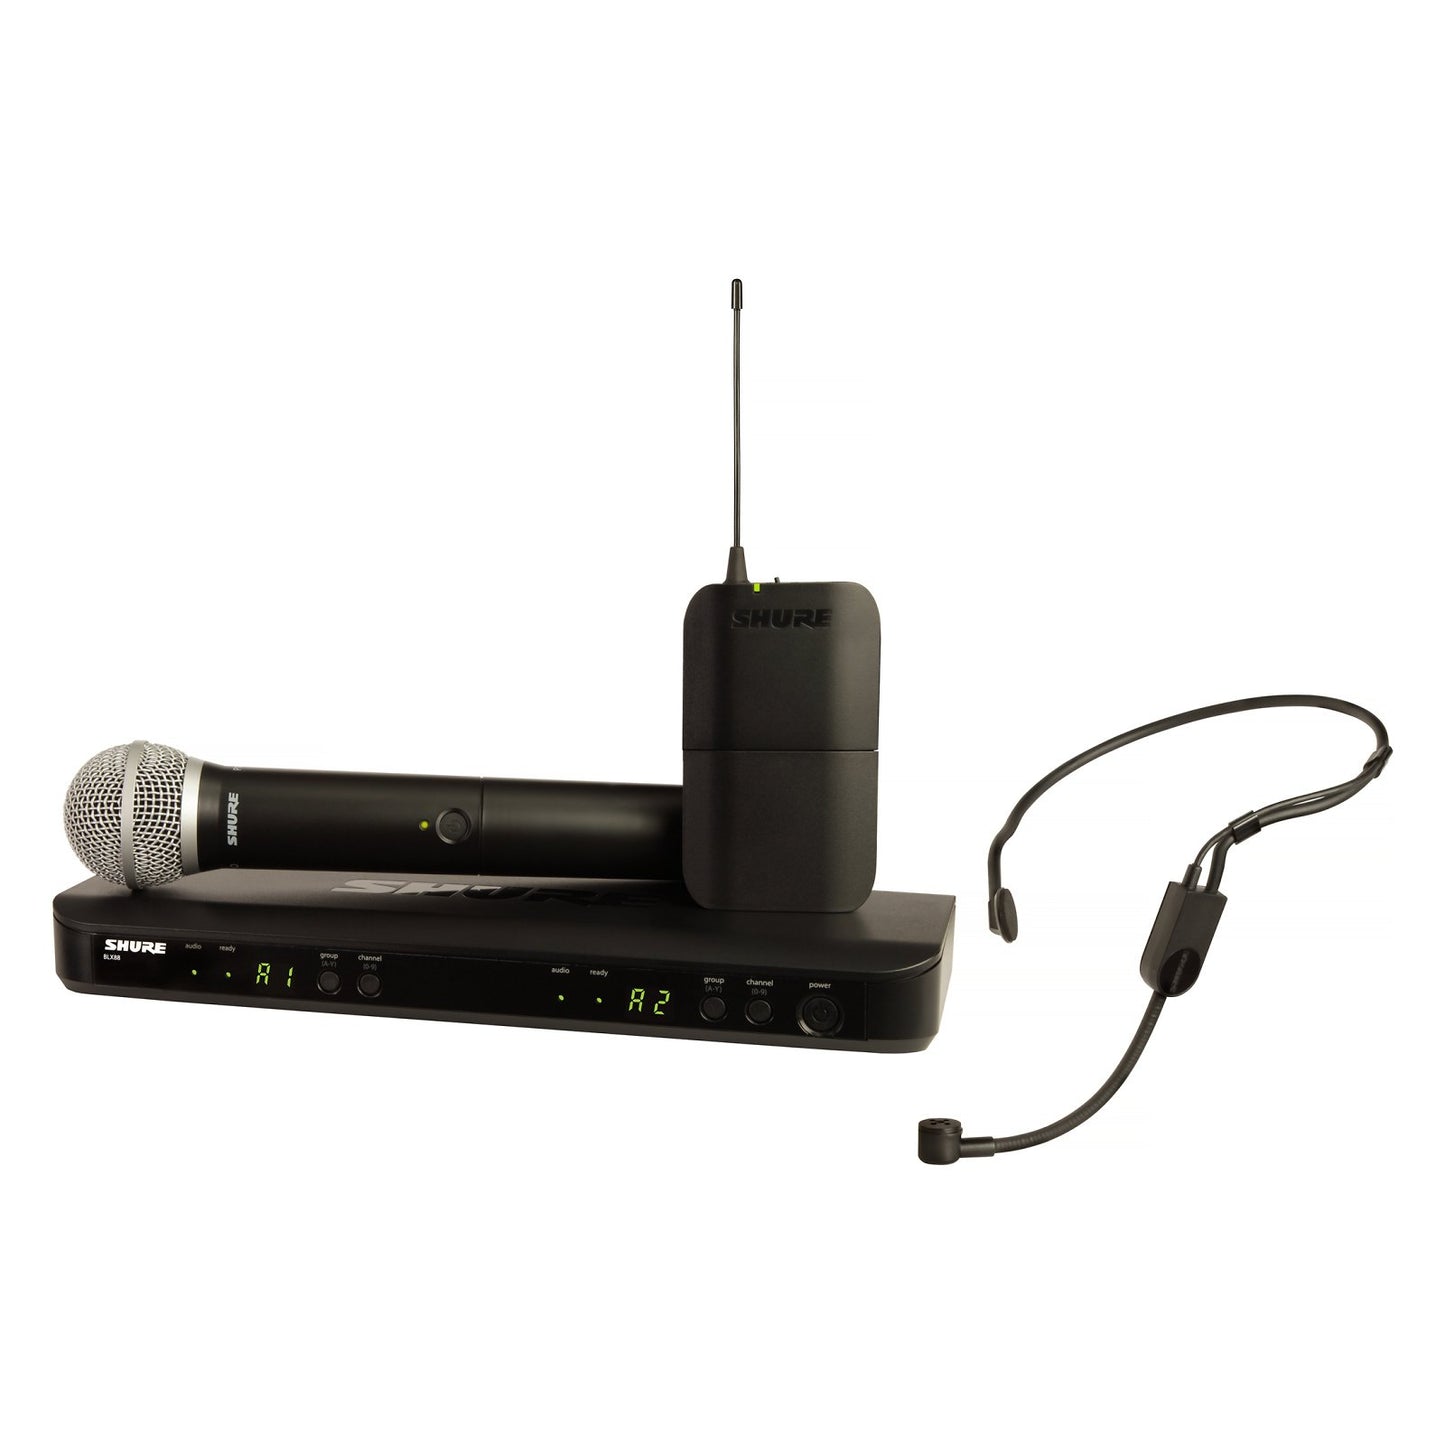 Shure BLX1288/P31 Combination Wireless PGA31 Headset and PG58 Handheld Microphone System, Band H9 (512-542 MHz)